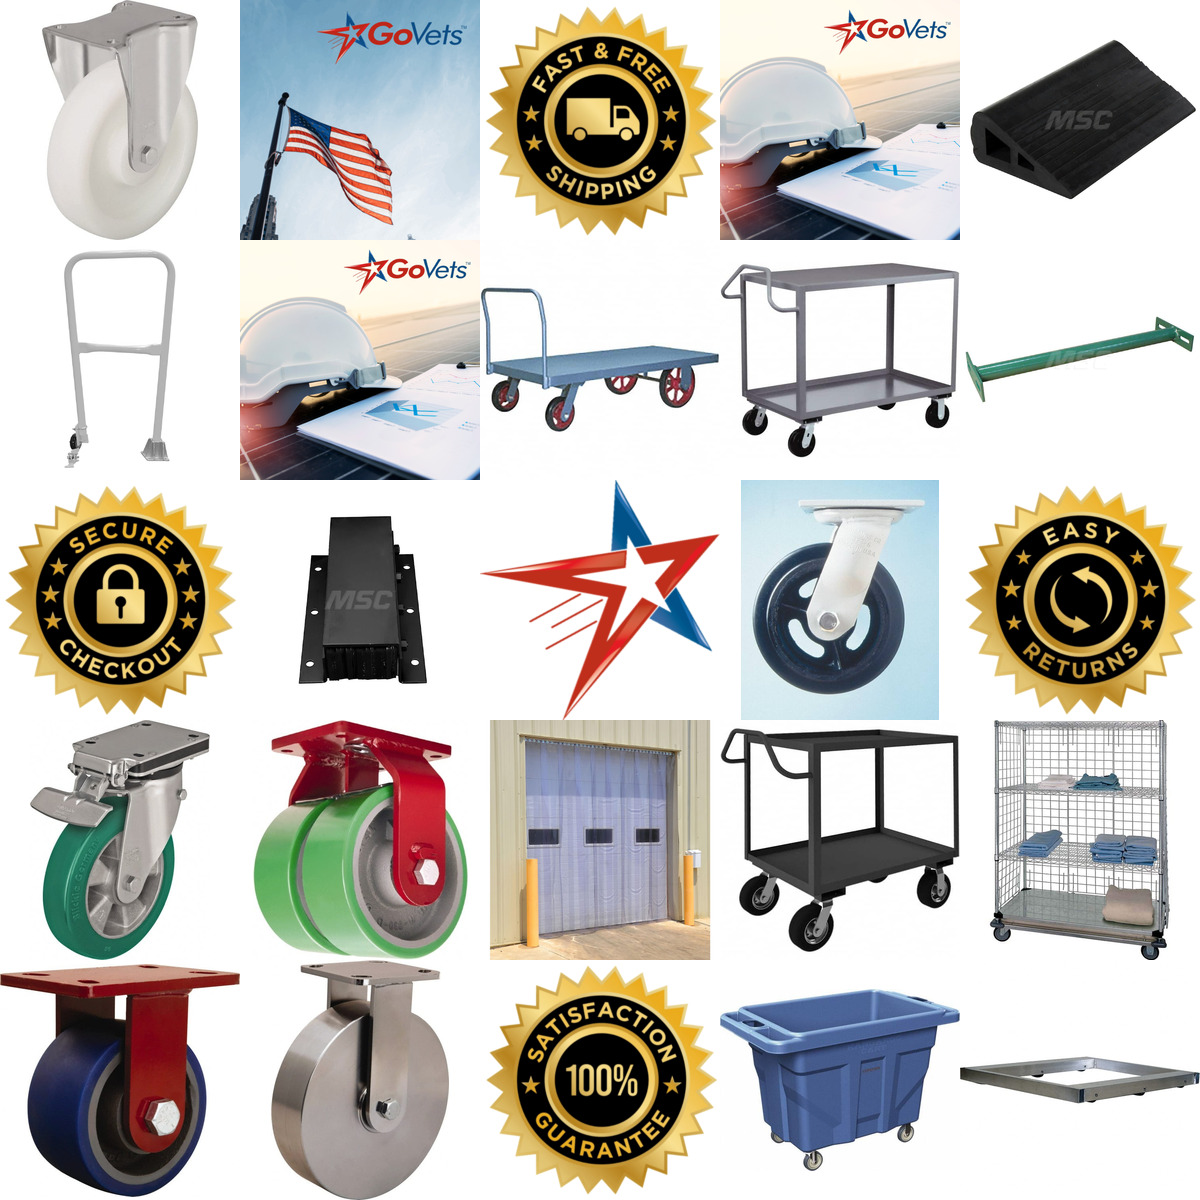 A selection of Material Transport products on GoVets